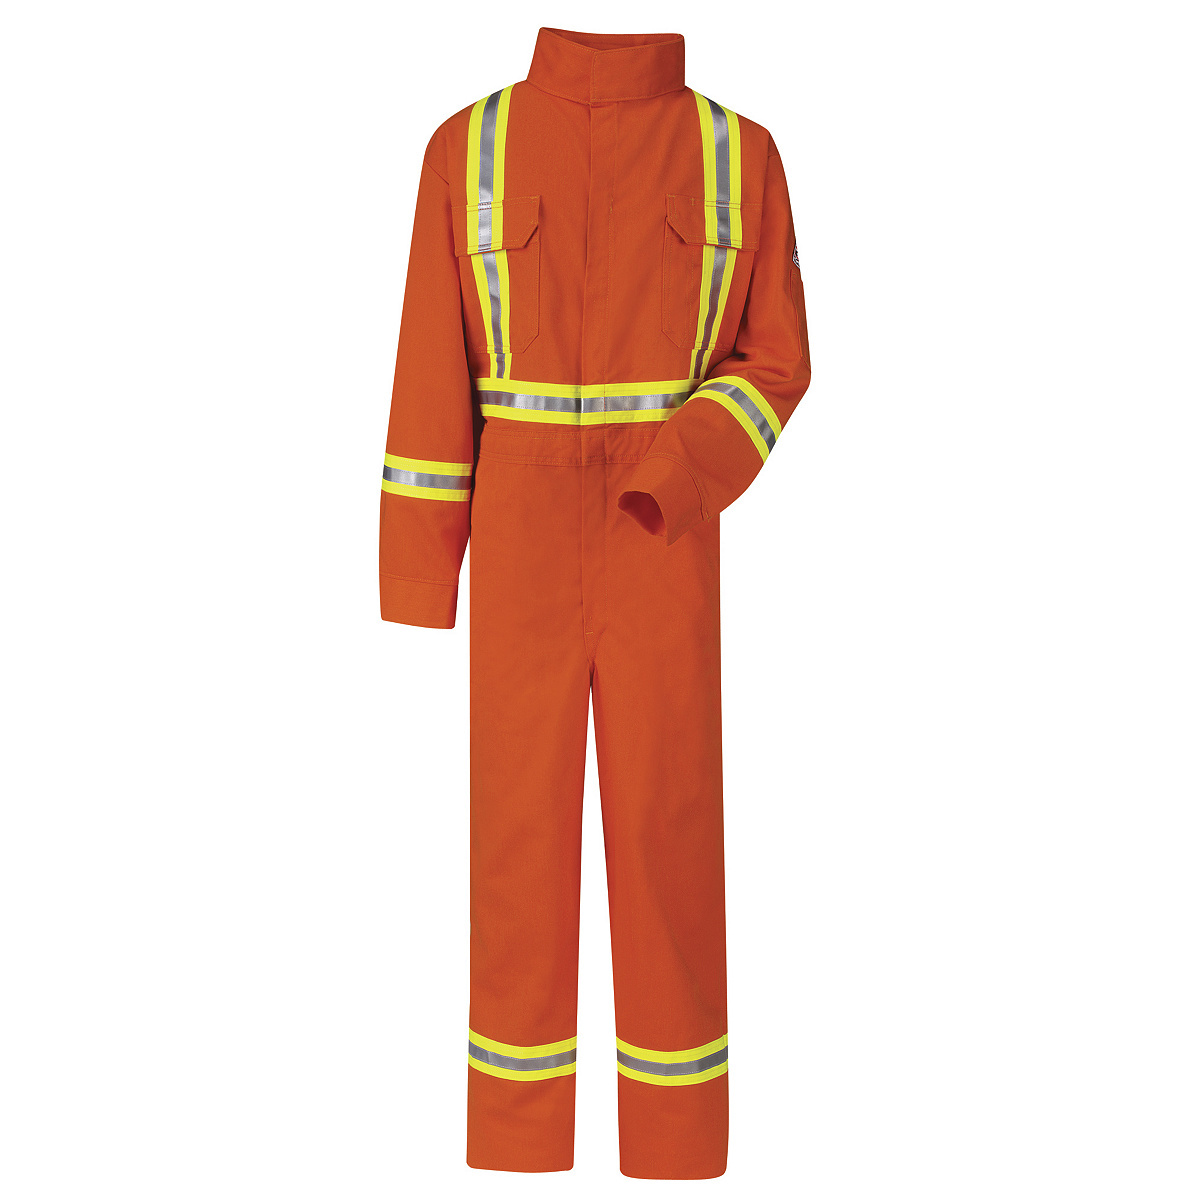 Bulwark® 46 Tall Orange Westex Ultrasoft® Twill/Cotton/Nylon Flame Resistant Coveralls With Zipper Front Closure And Reflective